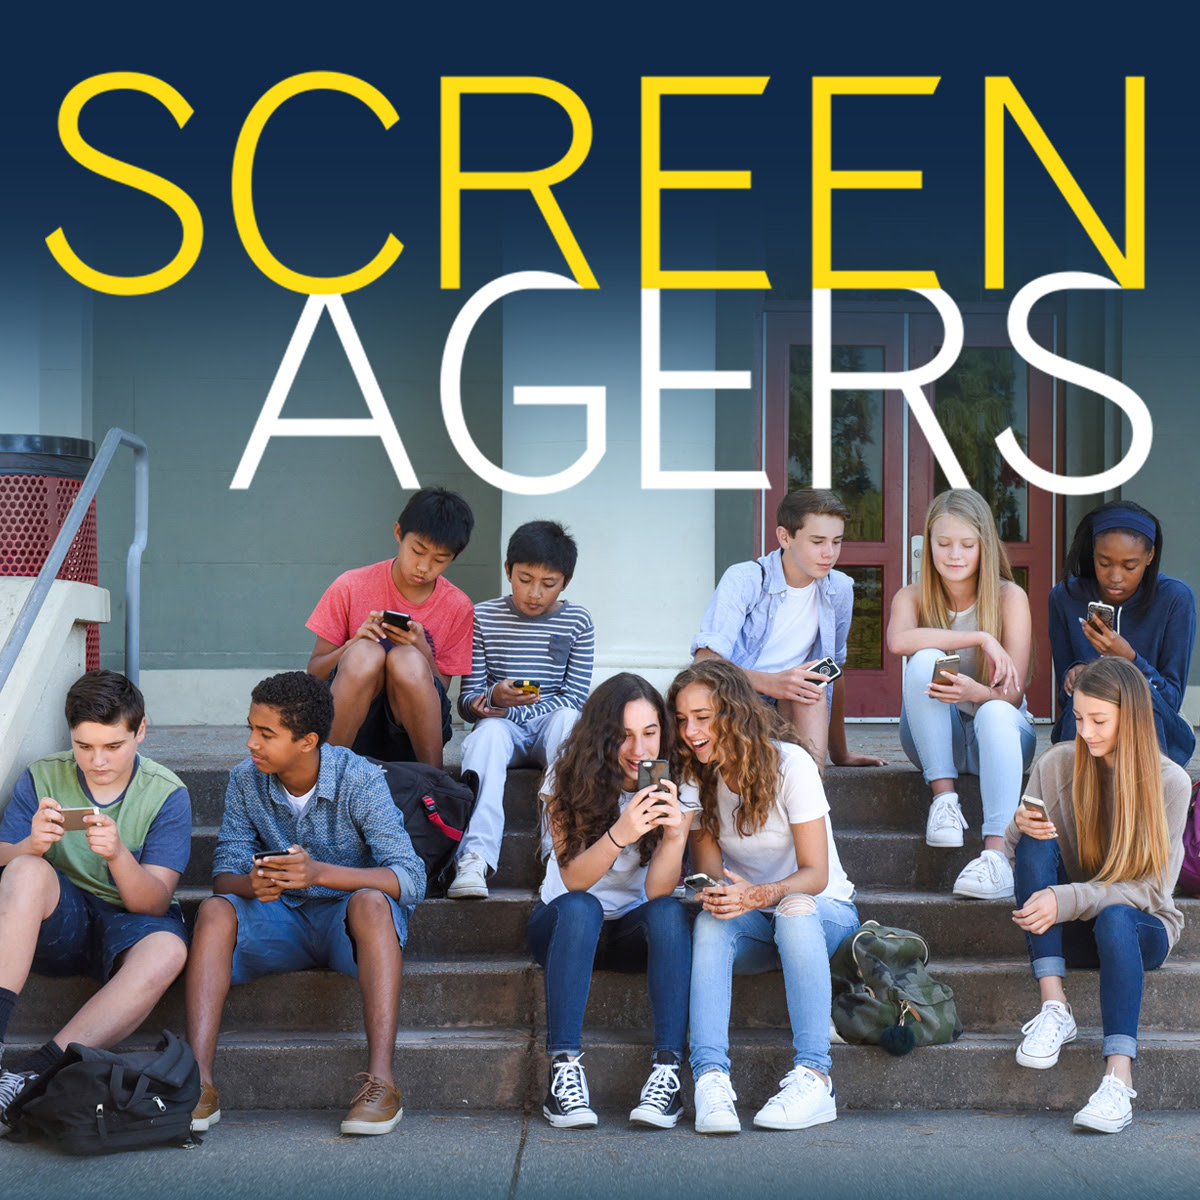 Screenagers Presented By The Church of the Holy Trinity, Rittenhouse Square